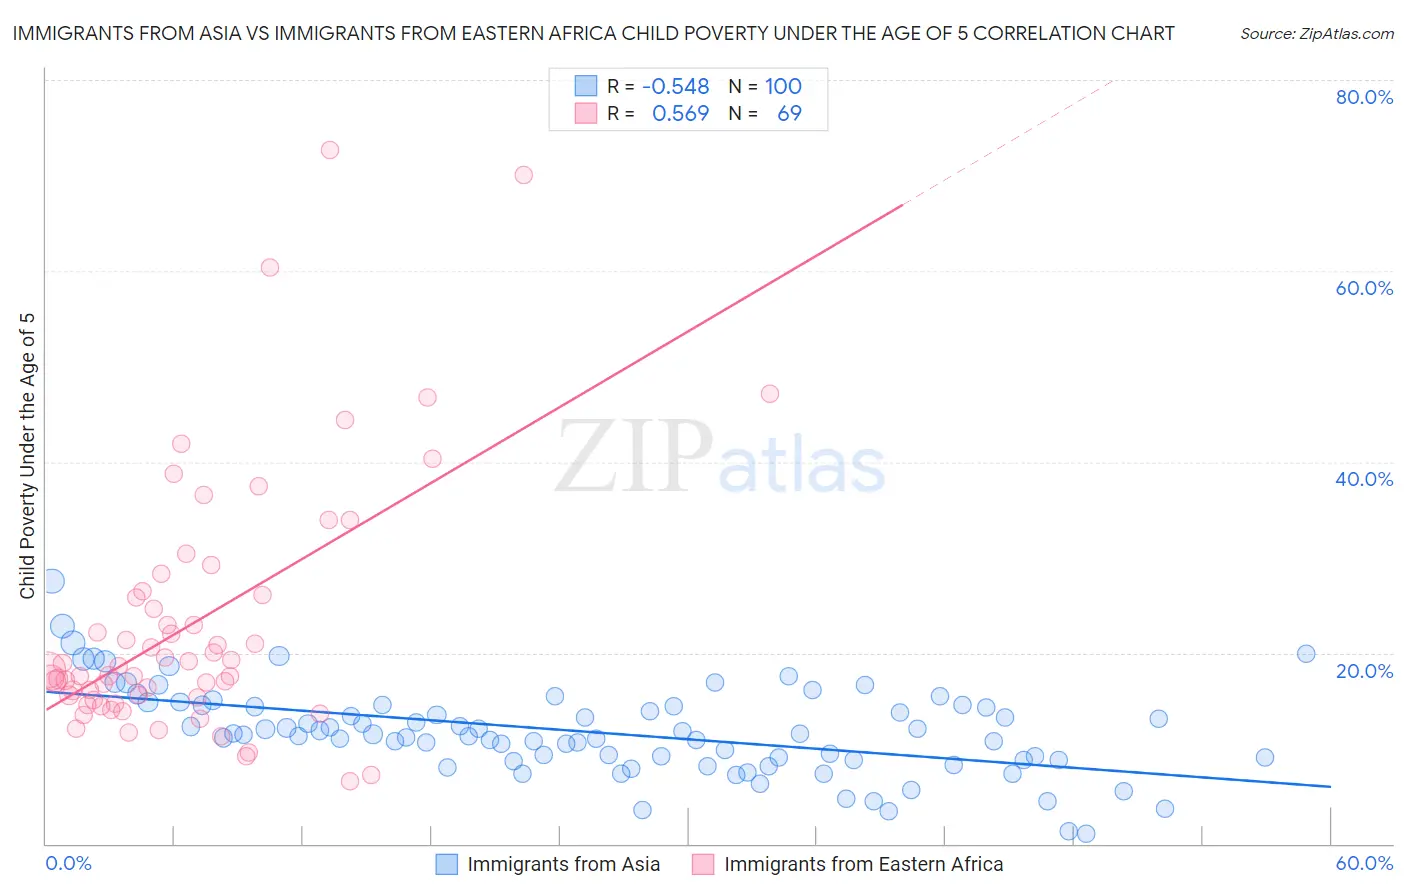 Immigrants from Asia vs Immigrants from Eastern Africa Child Poverty Under the Age of 5